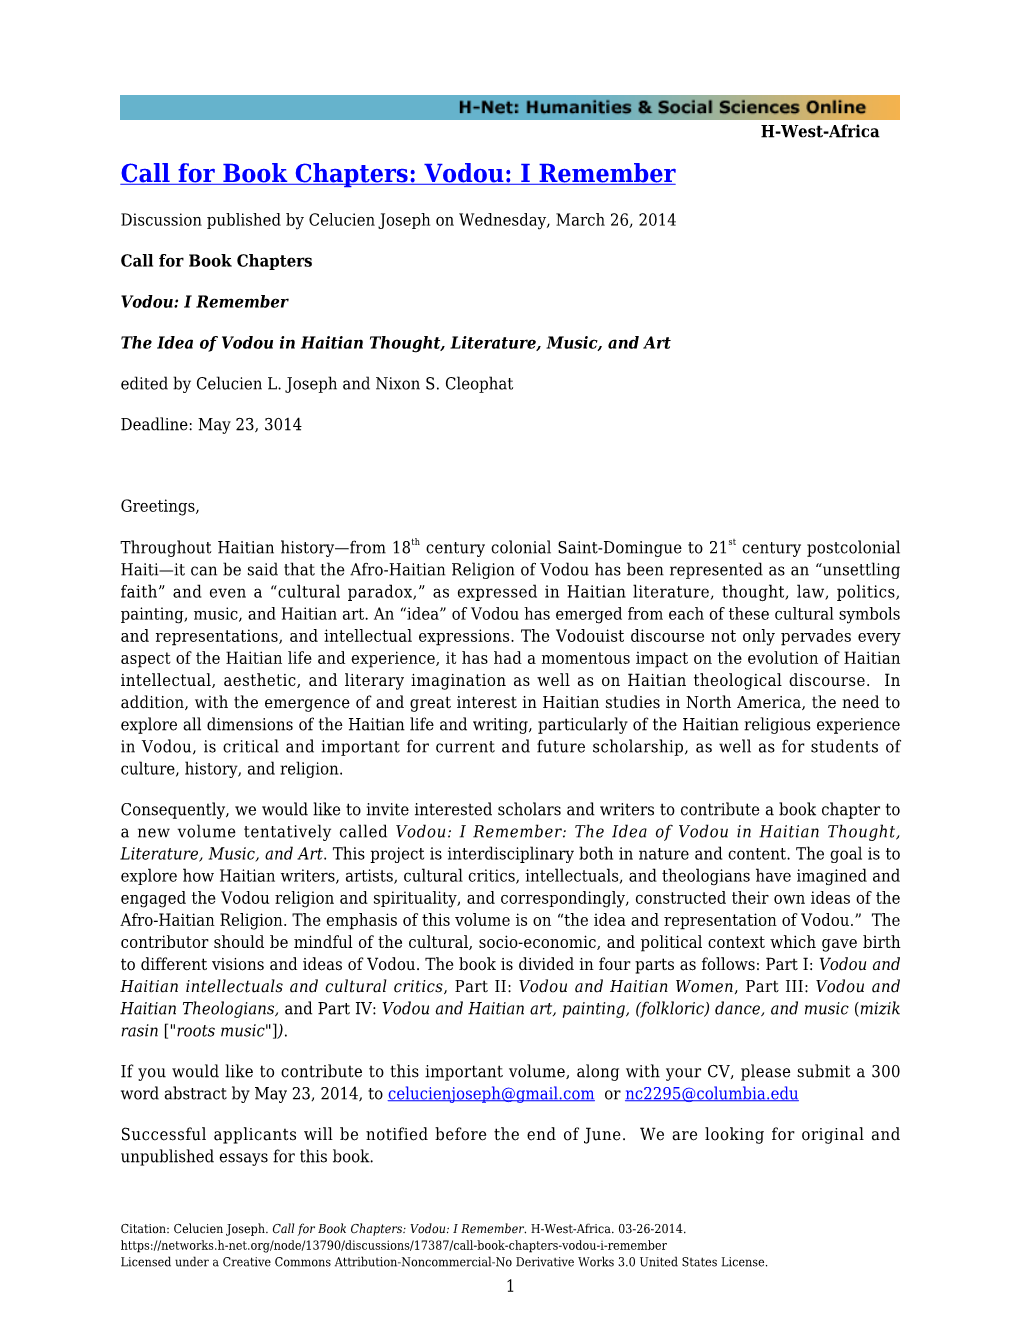 Call for Book Chapters: Vodou: I Remember